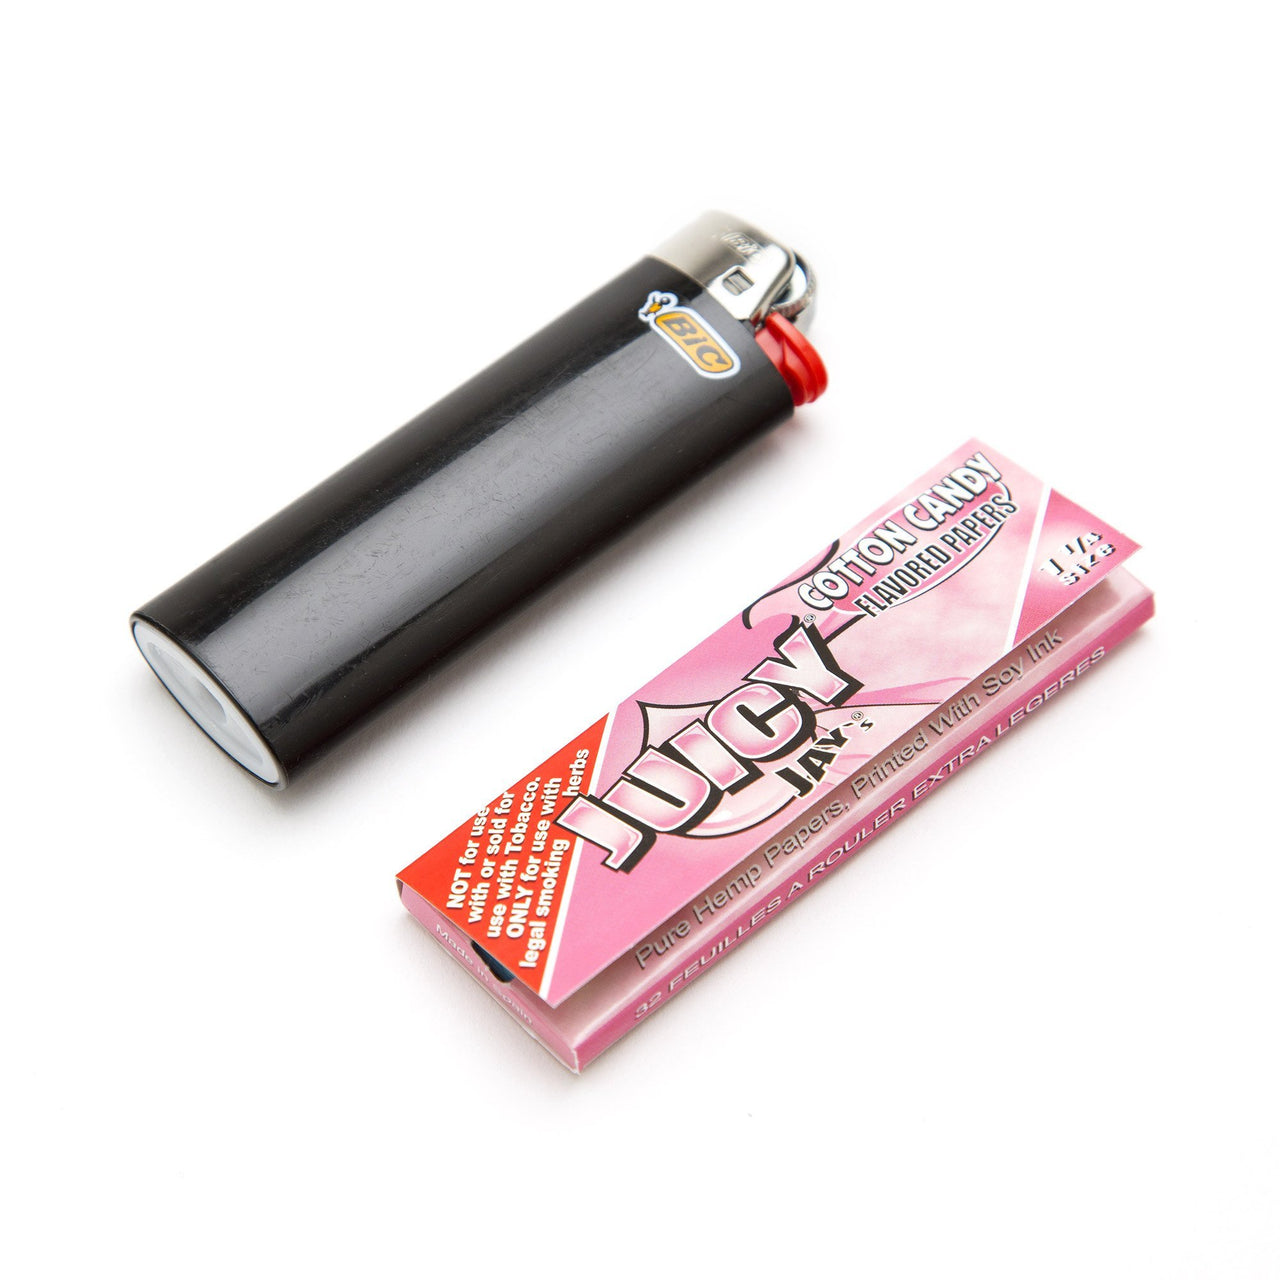 Juicy Jay's 1 1/4in Flavored Papers - Cotton Candy - 420 Science - The most trusted online smoke shop.